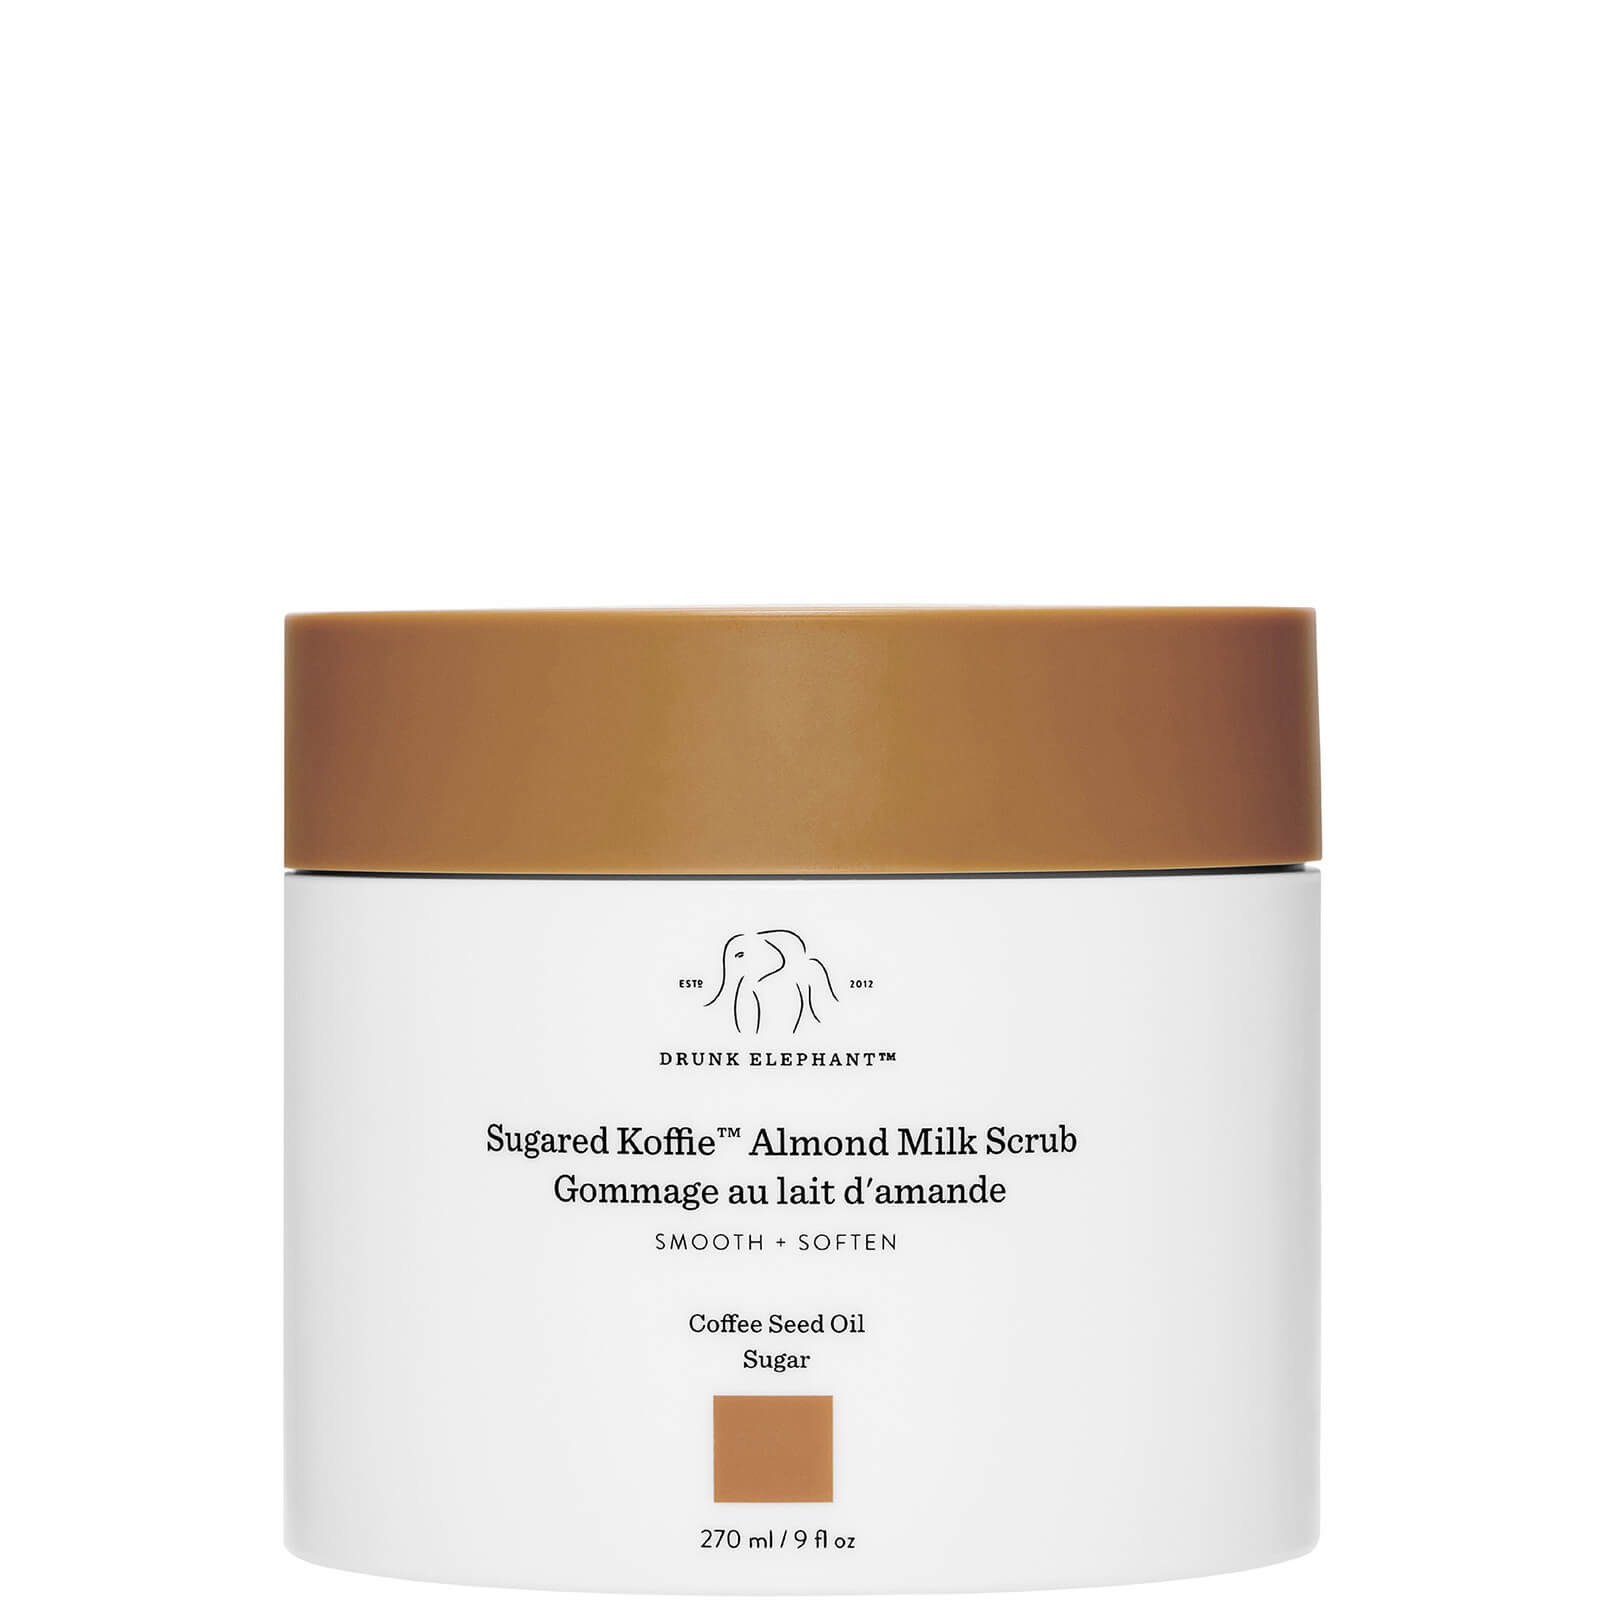 Photos - Facial / Body Cleansing Product Drunk Elephant Sugared Koffie Almond Milk Scrub